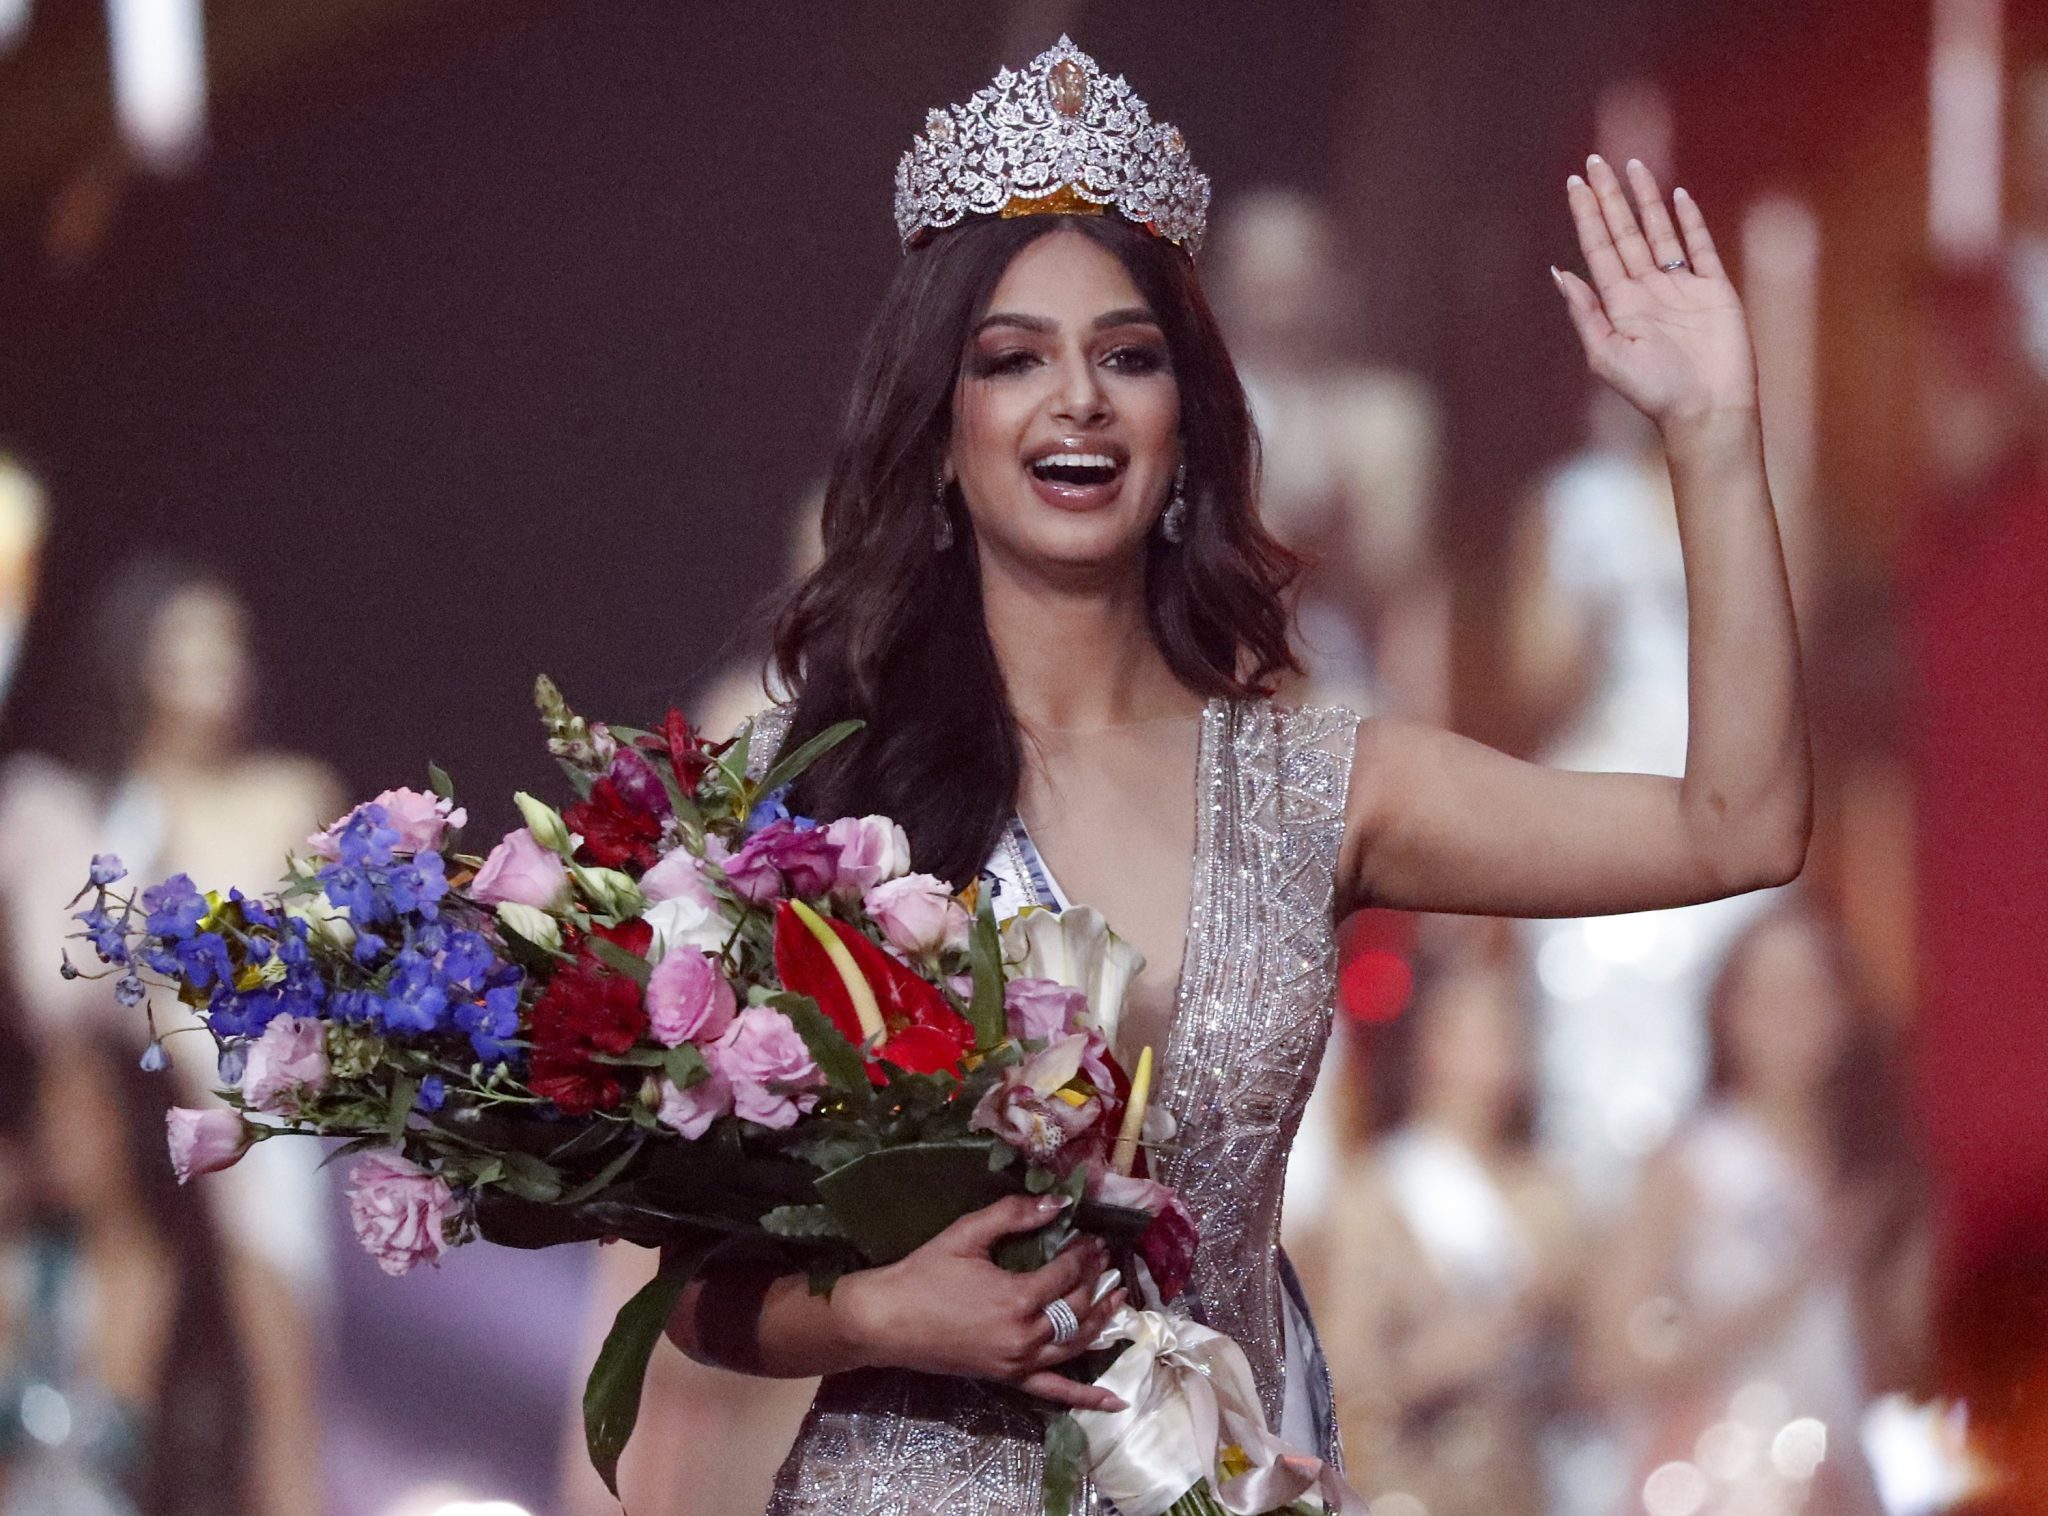 Now married women will also have the chance to 'Miss Universe